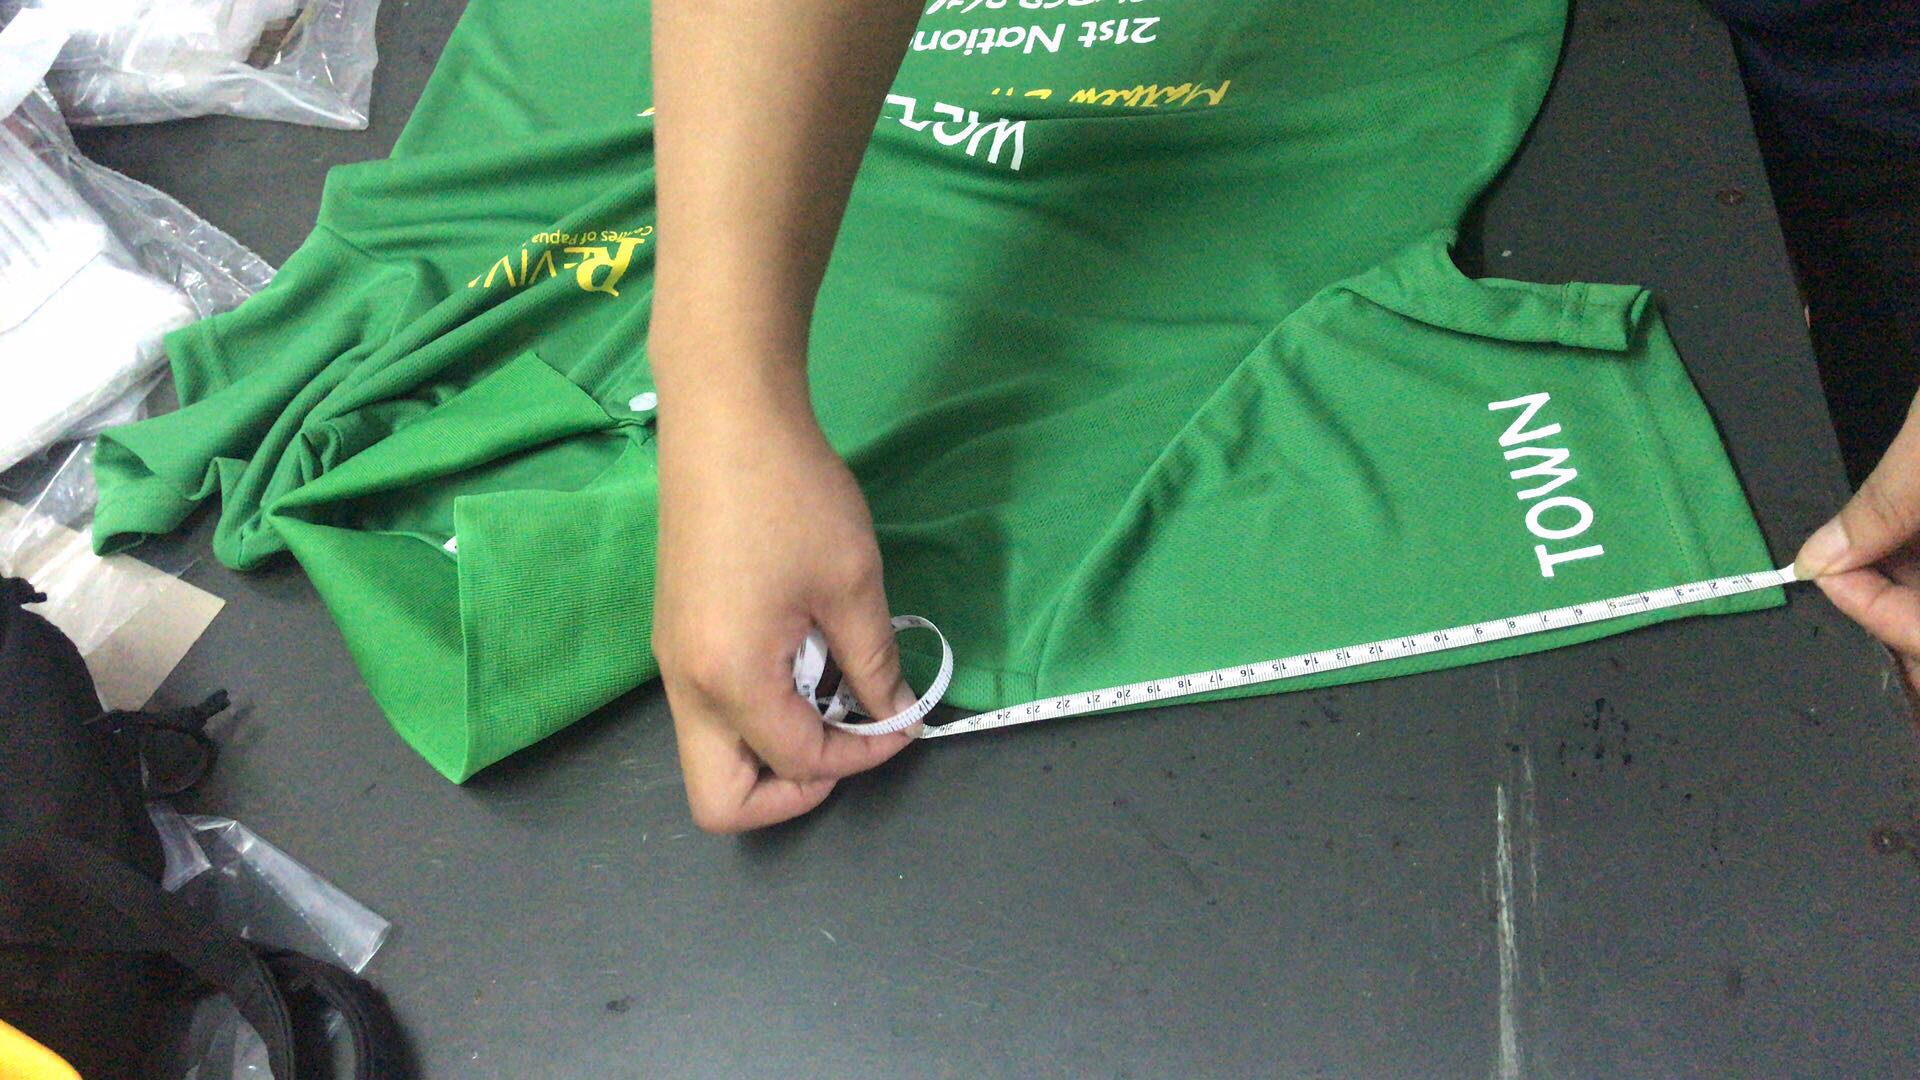 Inspection of custom design t-shirts in China - checking measurements